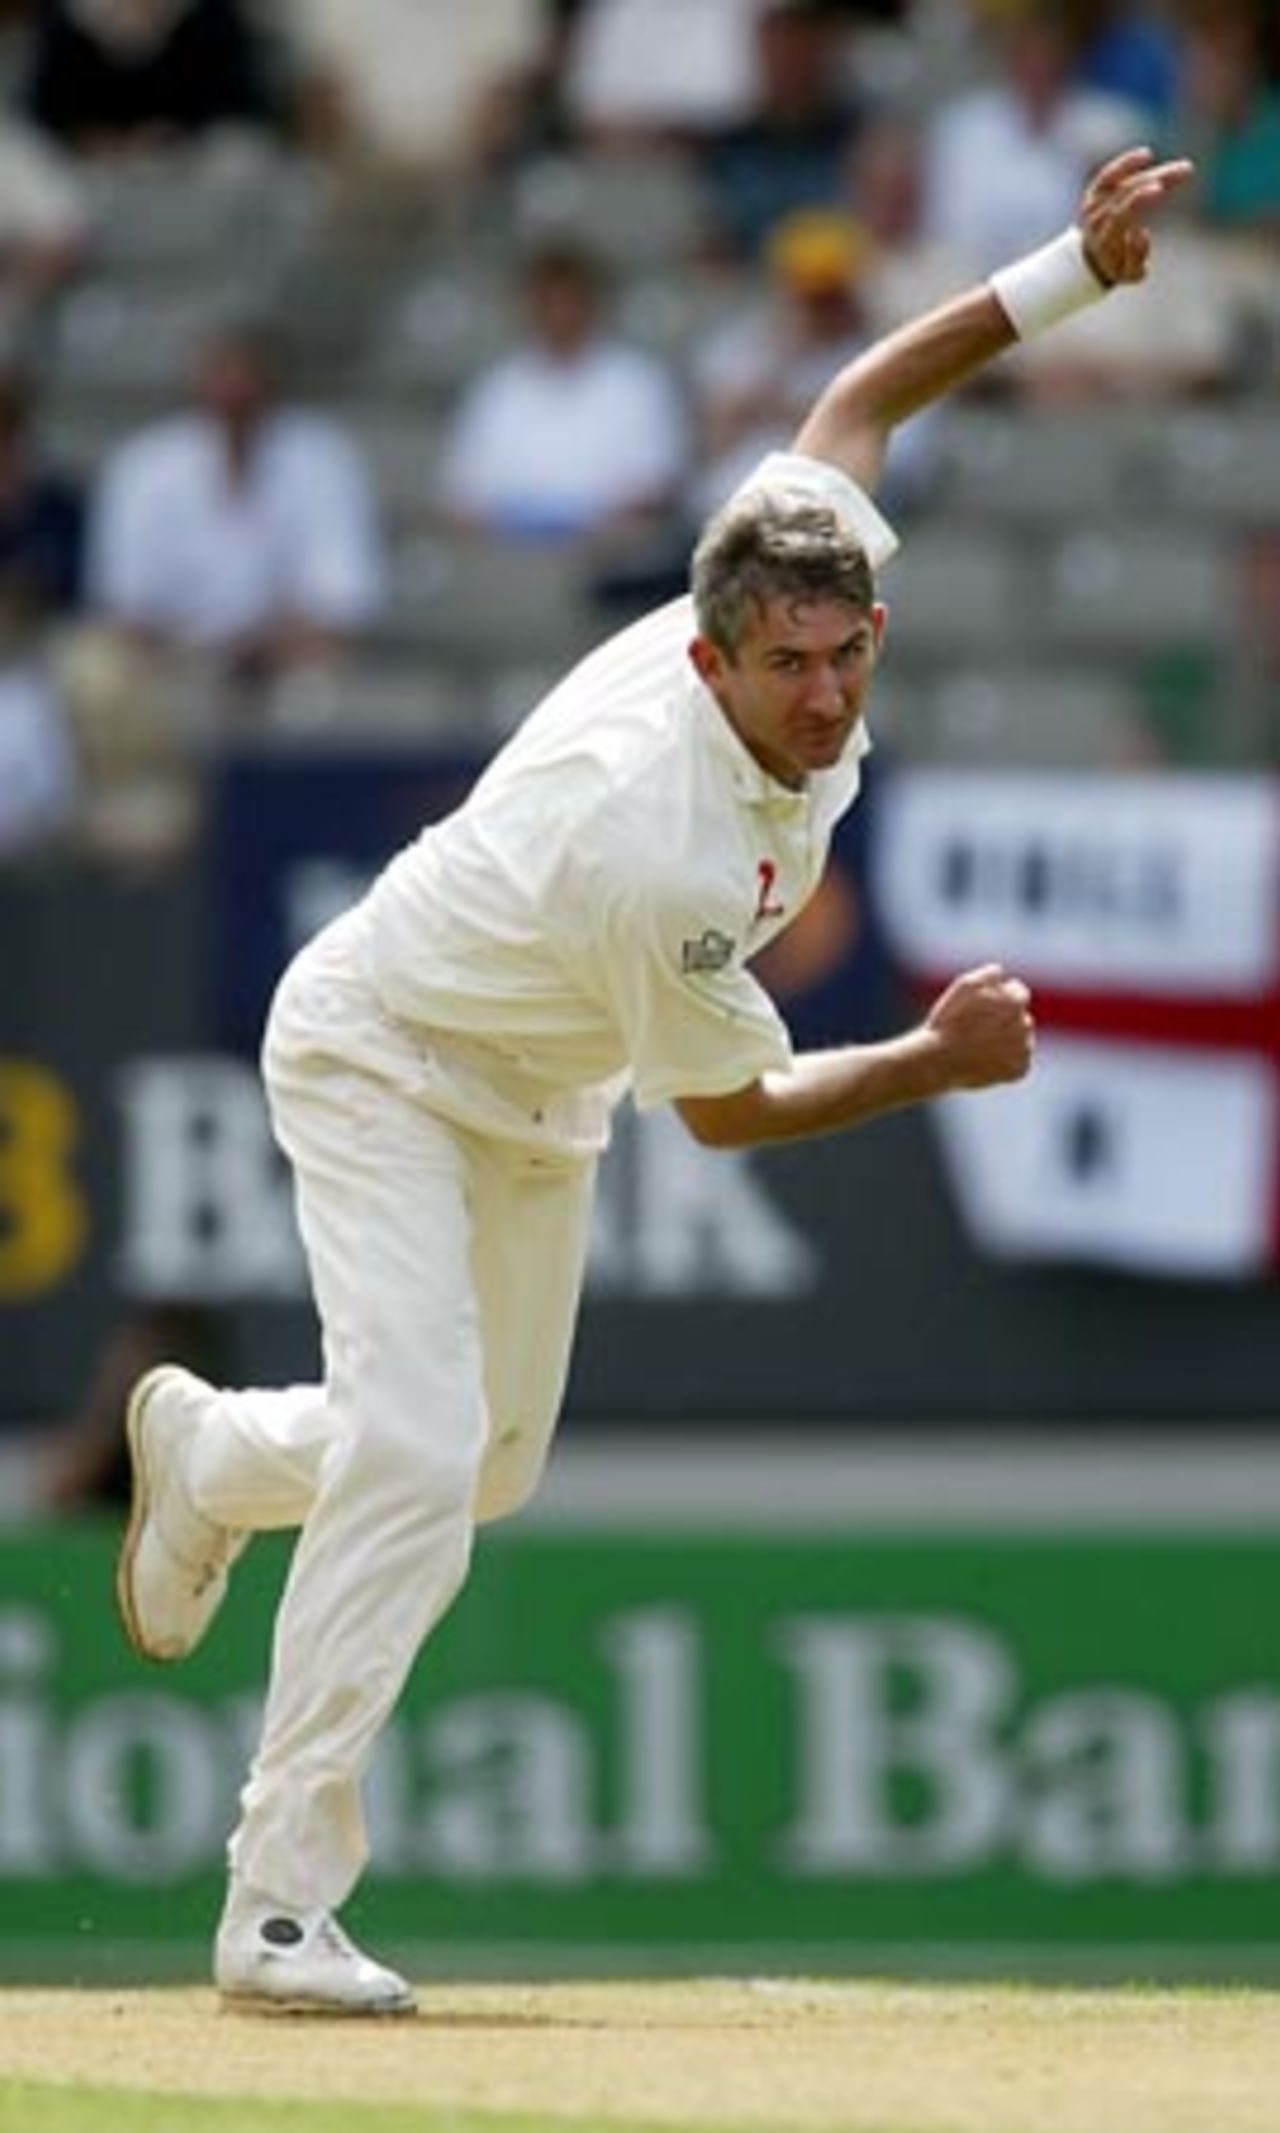 England bowler Andy Caddick completes delivering a ball during his first day spell of 4-57 from 20 overs. 3rd Test: New Zealand v England at Eden Park, Auckland, 30 March-3 April 2002 (30 March 2002).